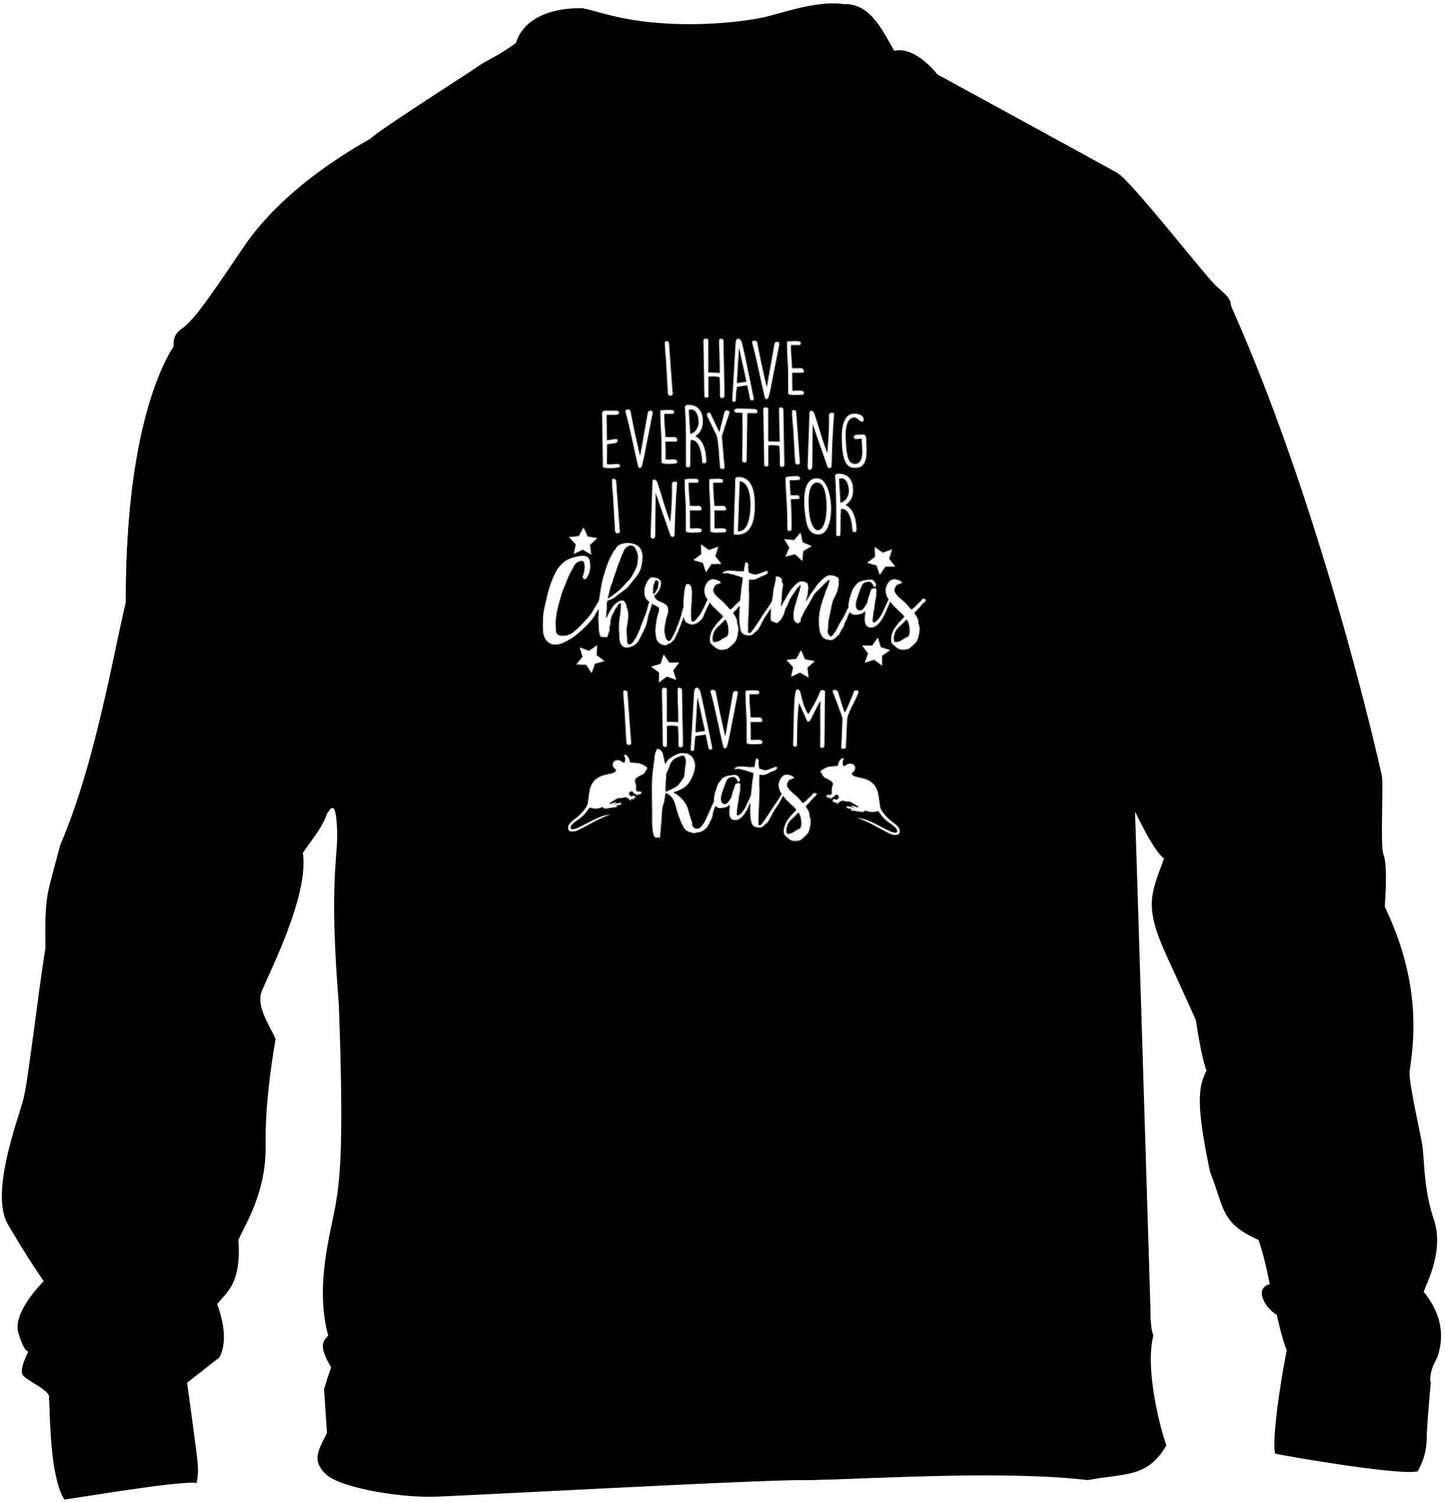 I have everything I need for Christmas I have my rats children's black sweater 12-13 Years